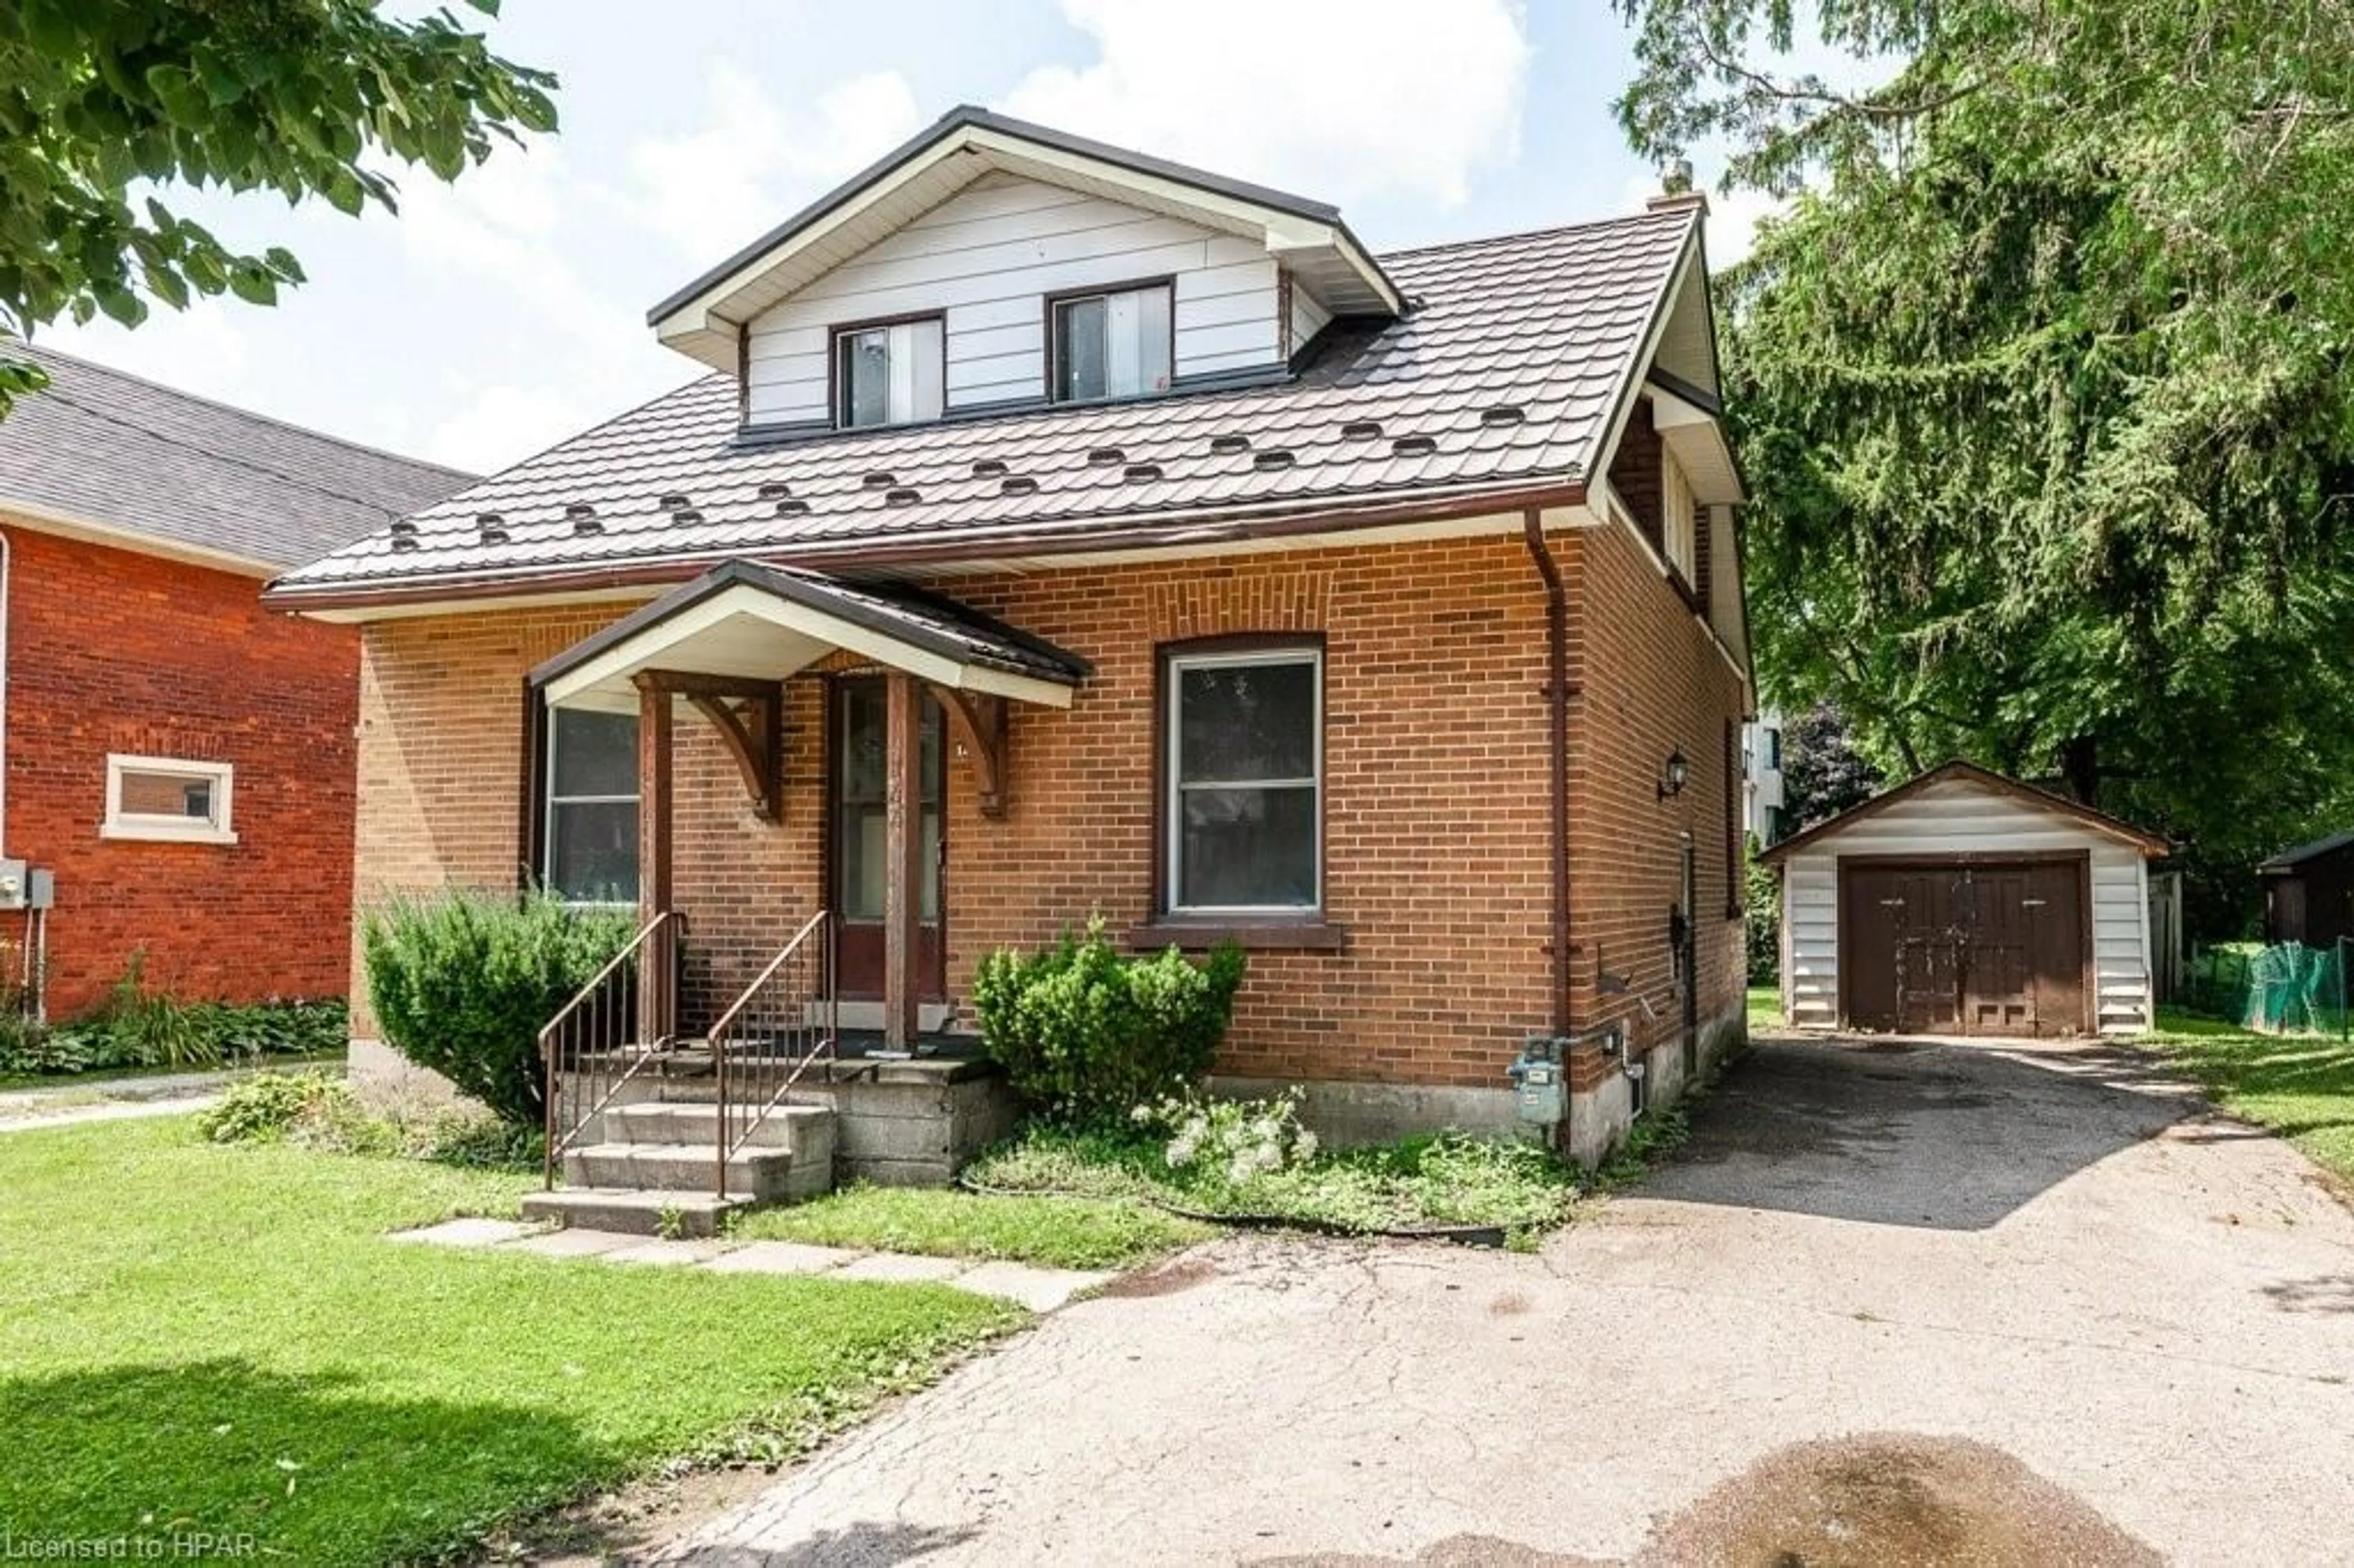 Home with brick exterior material for 144 Romeo St, Stratford Ontario N5A 4S9